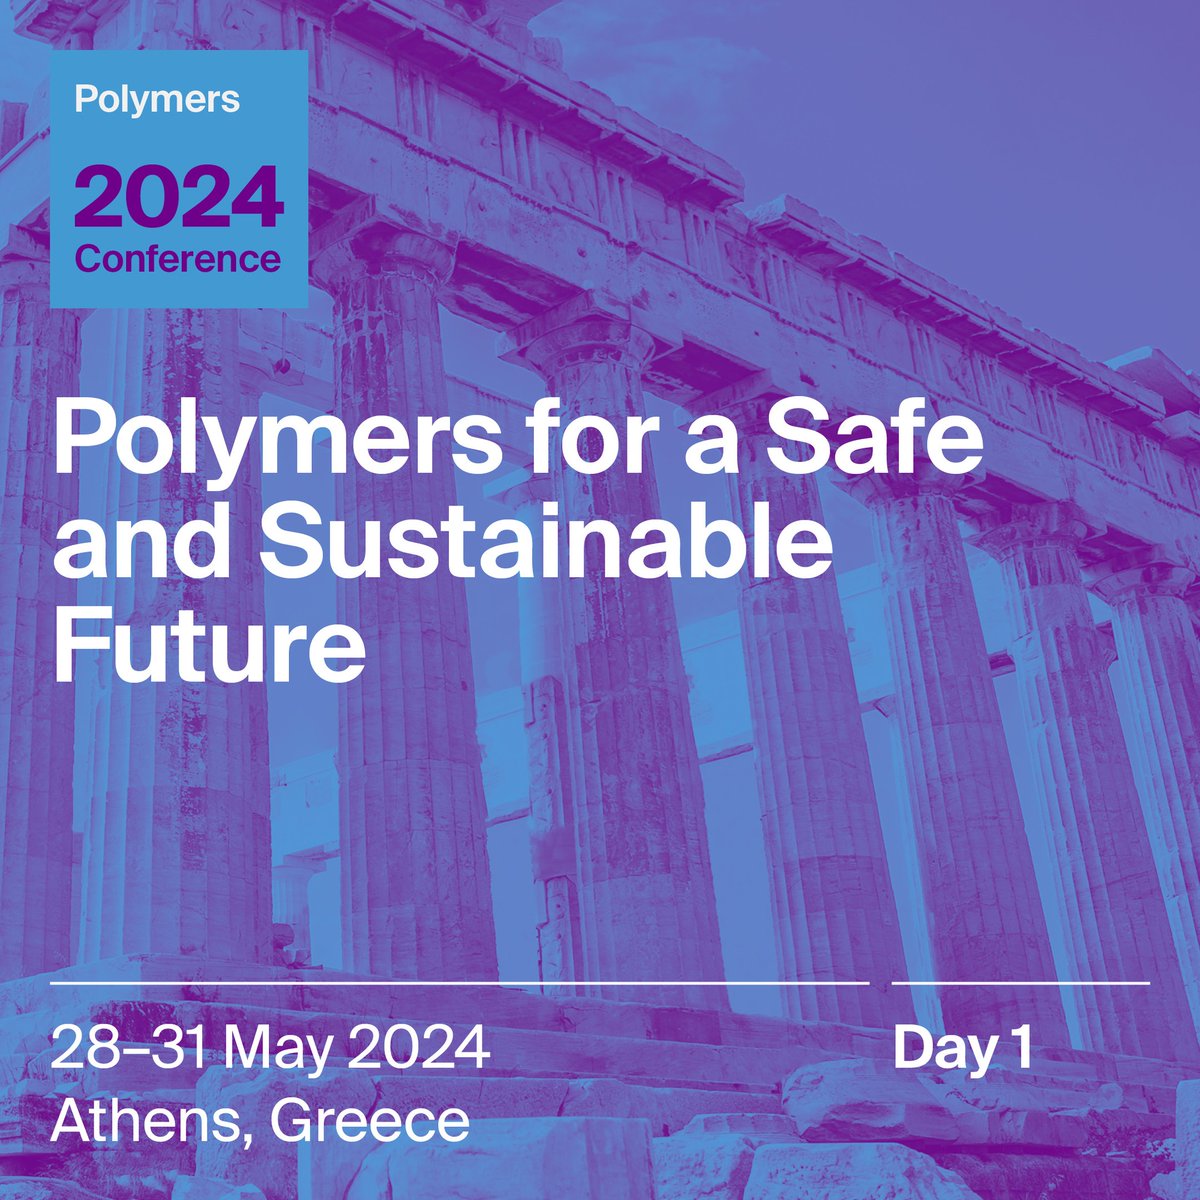 📢International Conference 'Polymers 2024: Pioneering a Sustainable Future' has started in Athens, Greece.

💮If you are one of the attendees, we welcome you to stop by our booth.

@MDPIOpenAccess 
@sciforum 
#conference #polymerscience